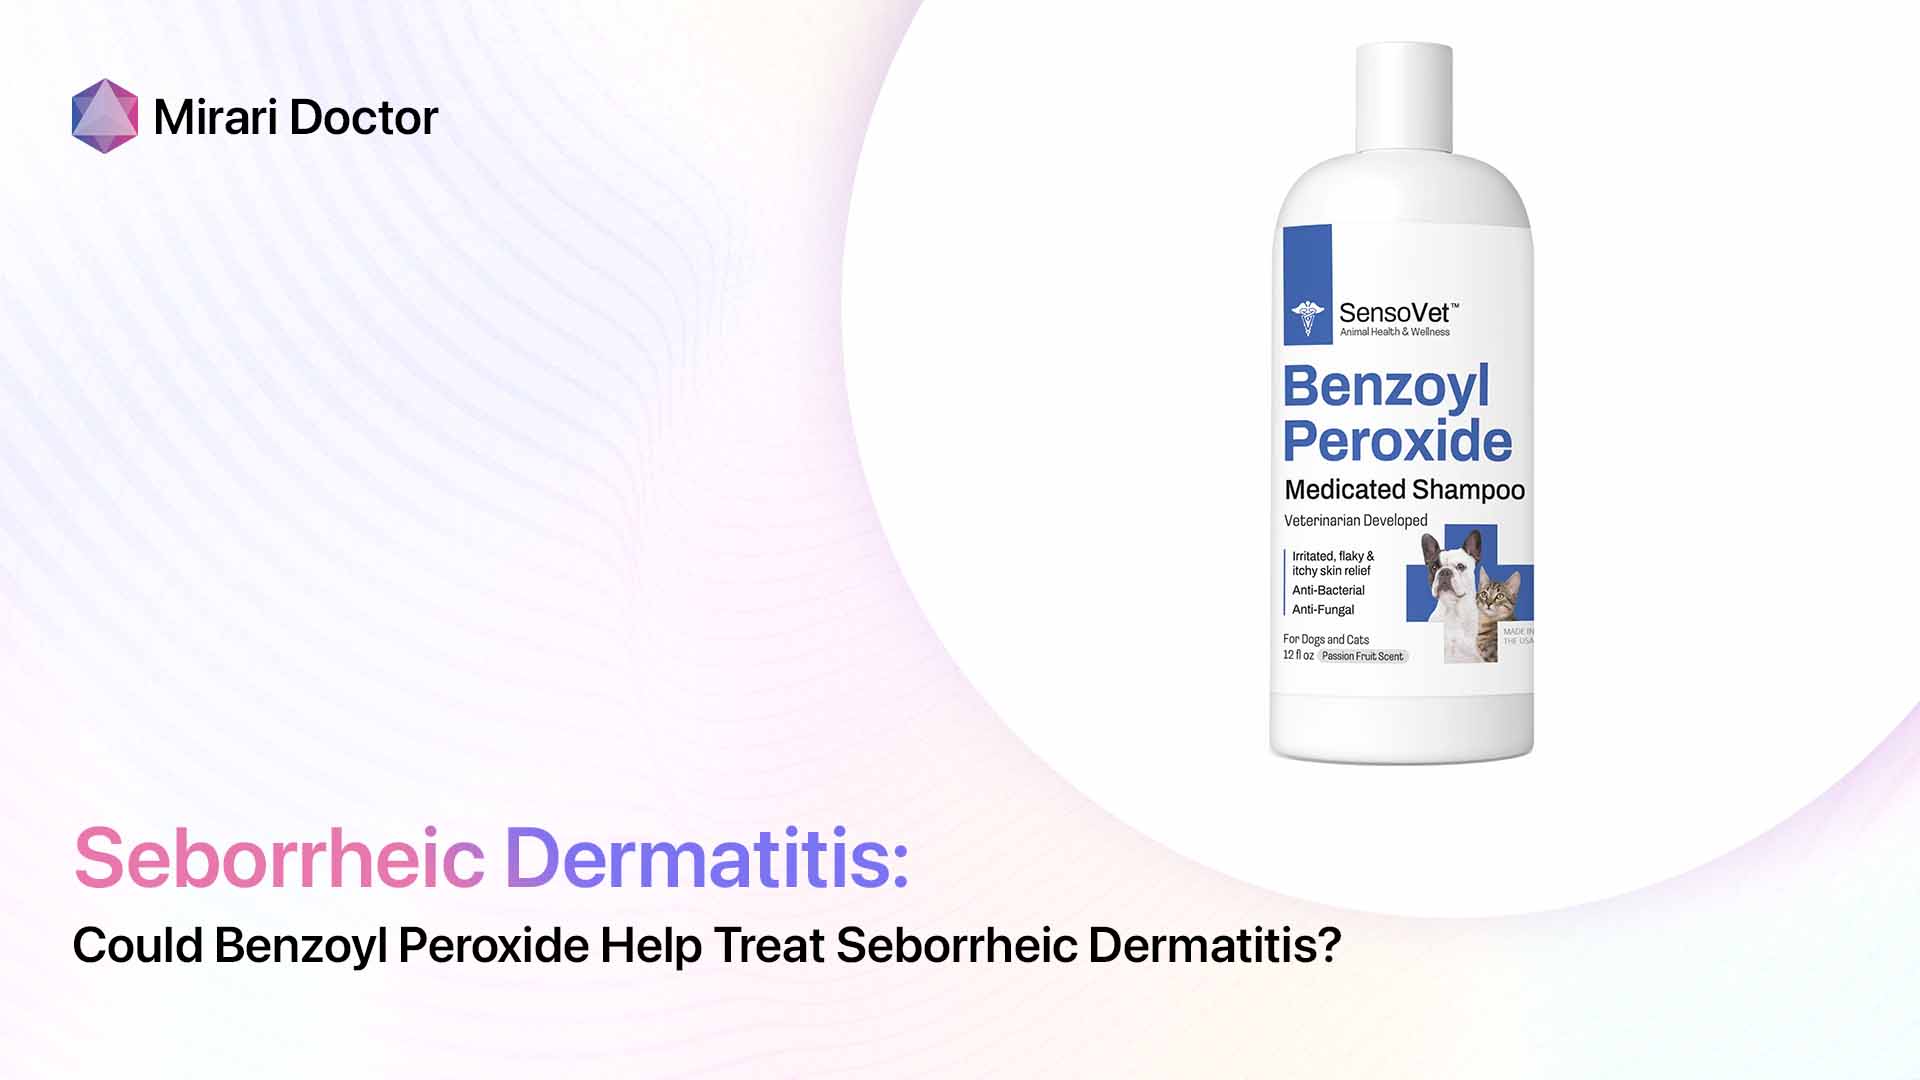 Featured image for “Could Benzoyl Peroxide Help Treat Seborrheic Dermatitis?”